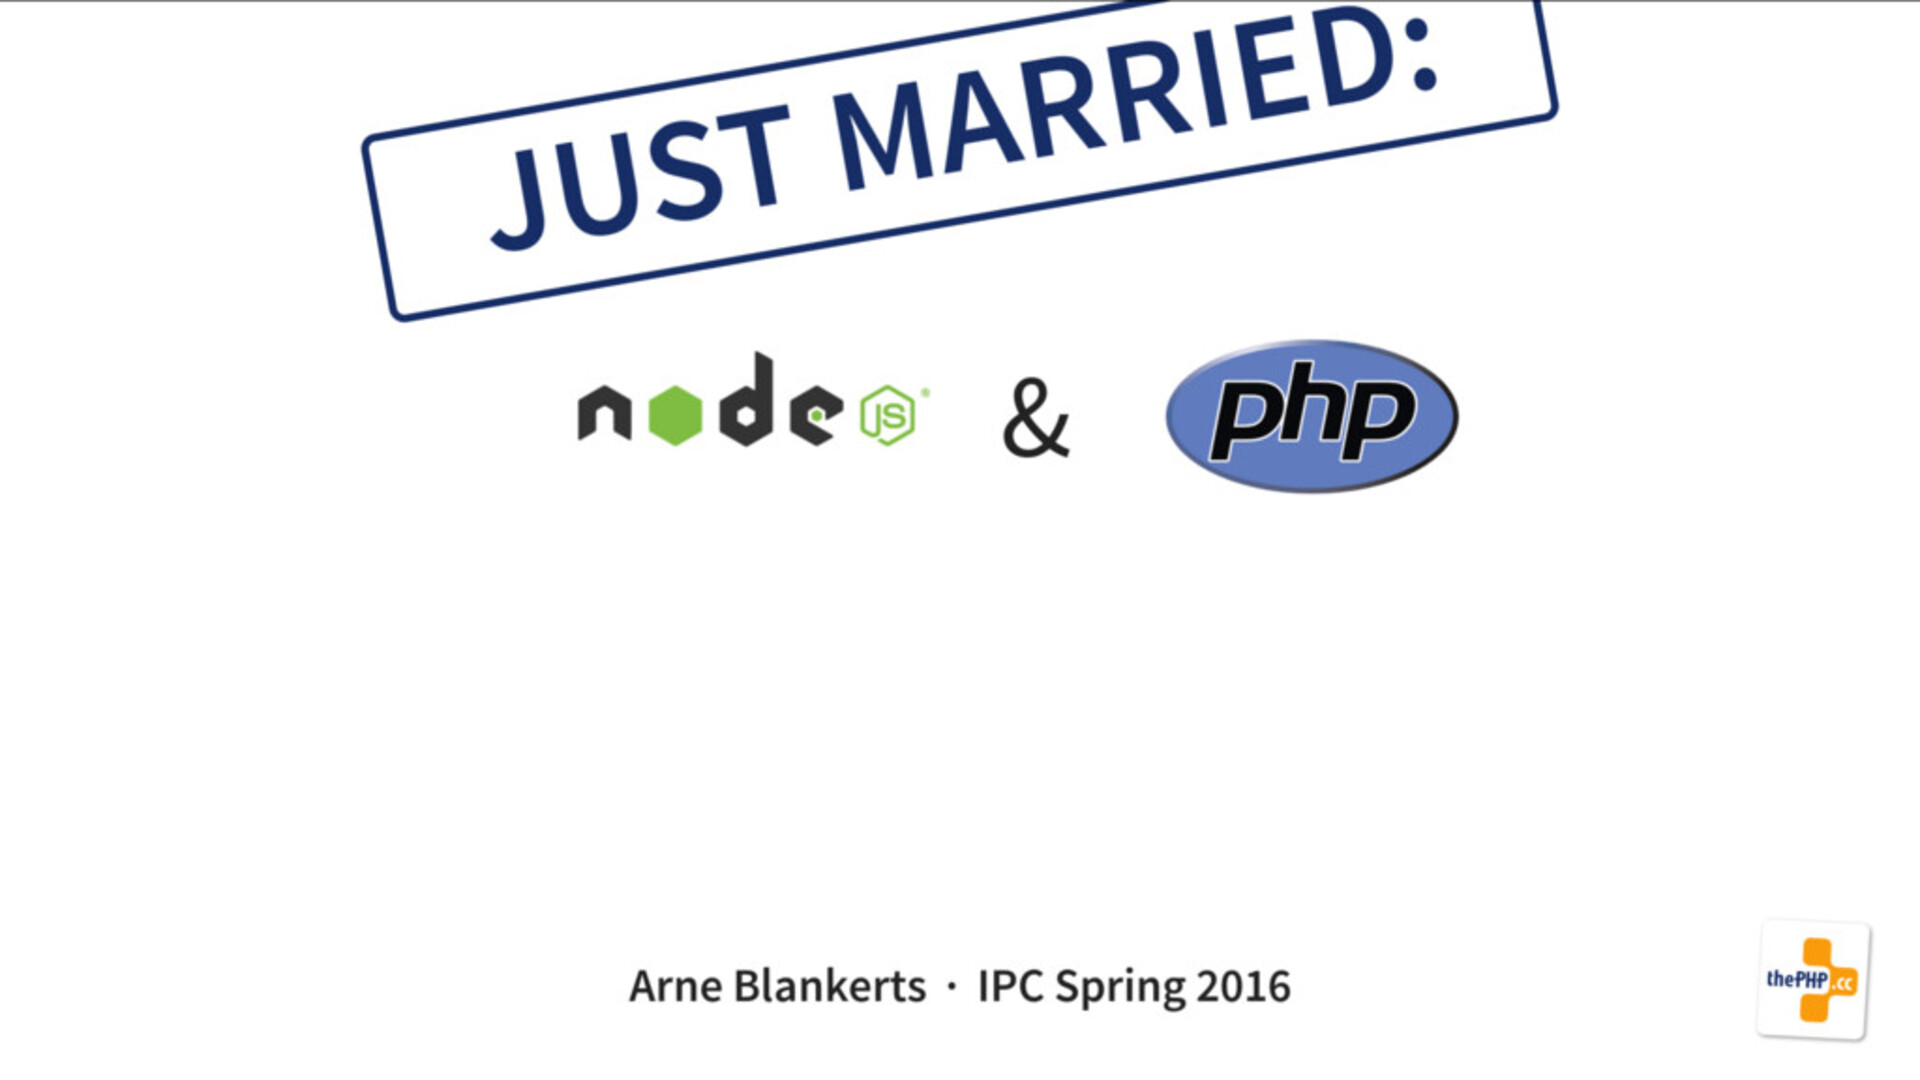 Just married: Node.js and PHP